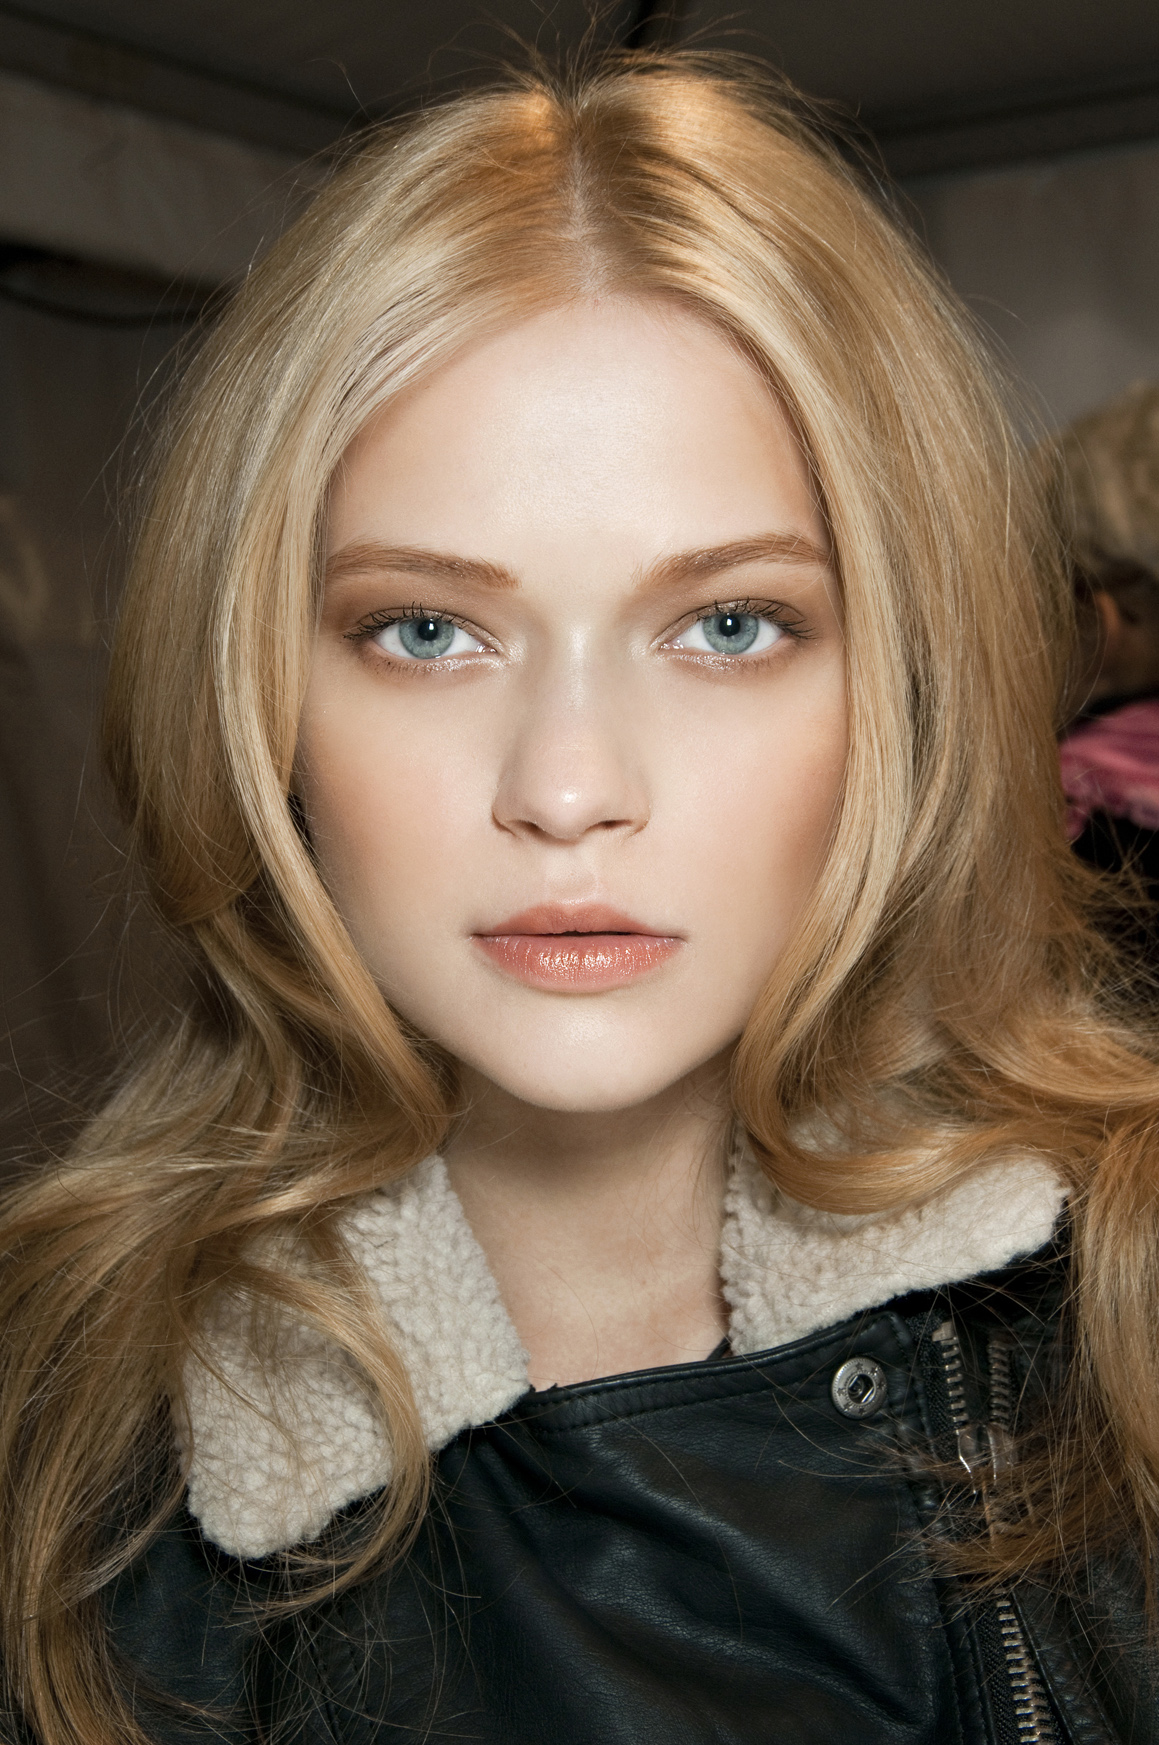 How to Keep Your Blowout Style Looking Fresh Overnight | StyleCaster